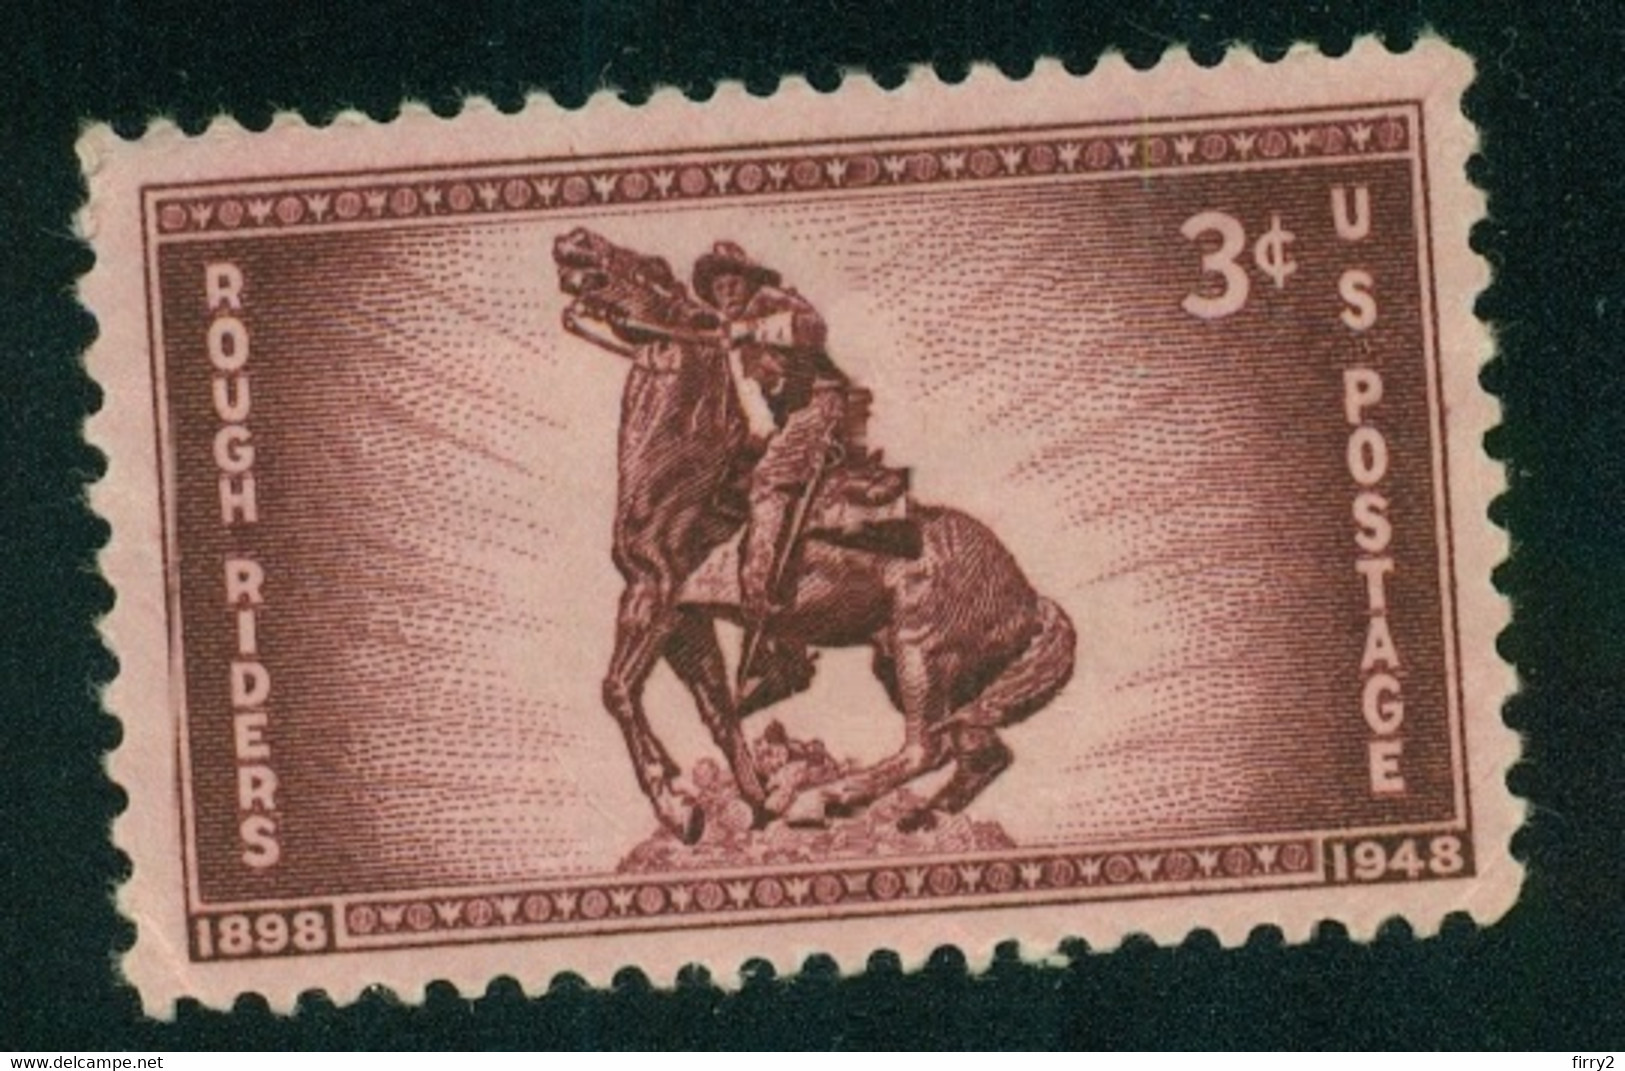 USA Scott #973  1948    3c Rough Riders   Mint Never Hinged (MNH) - Unused Stamps